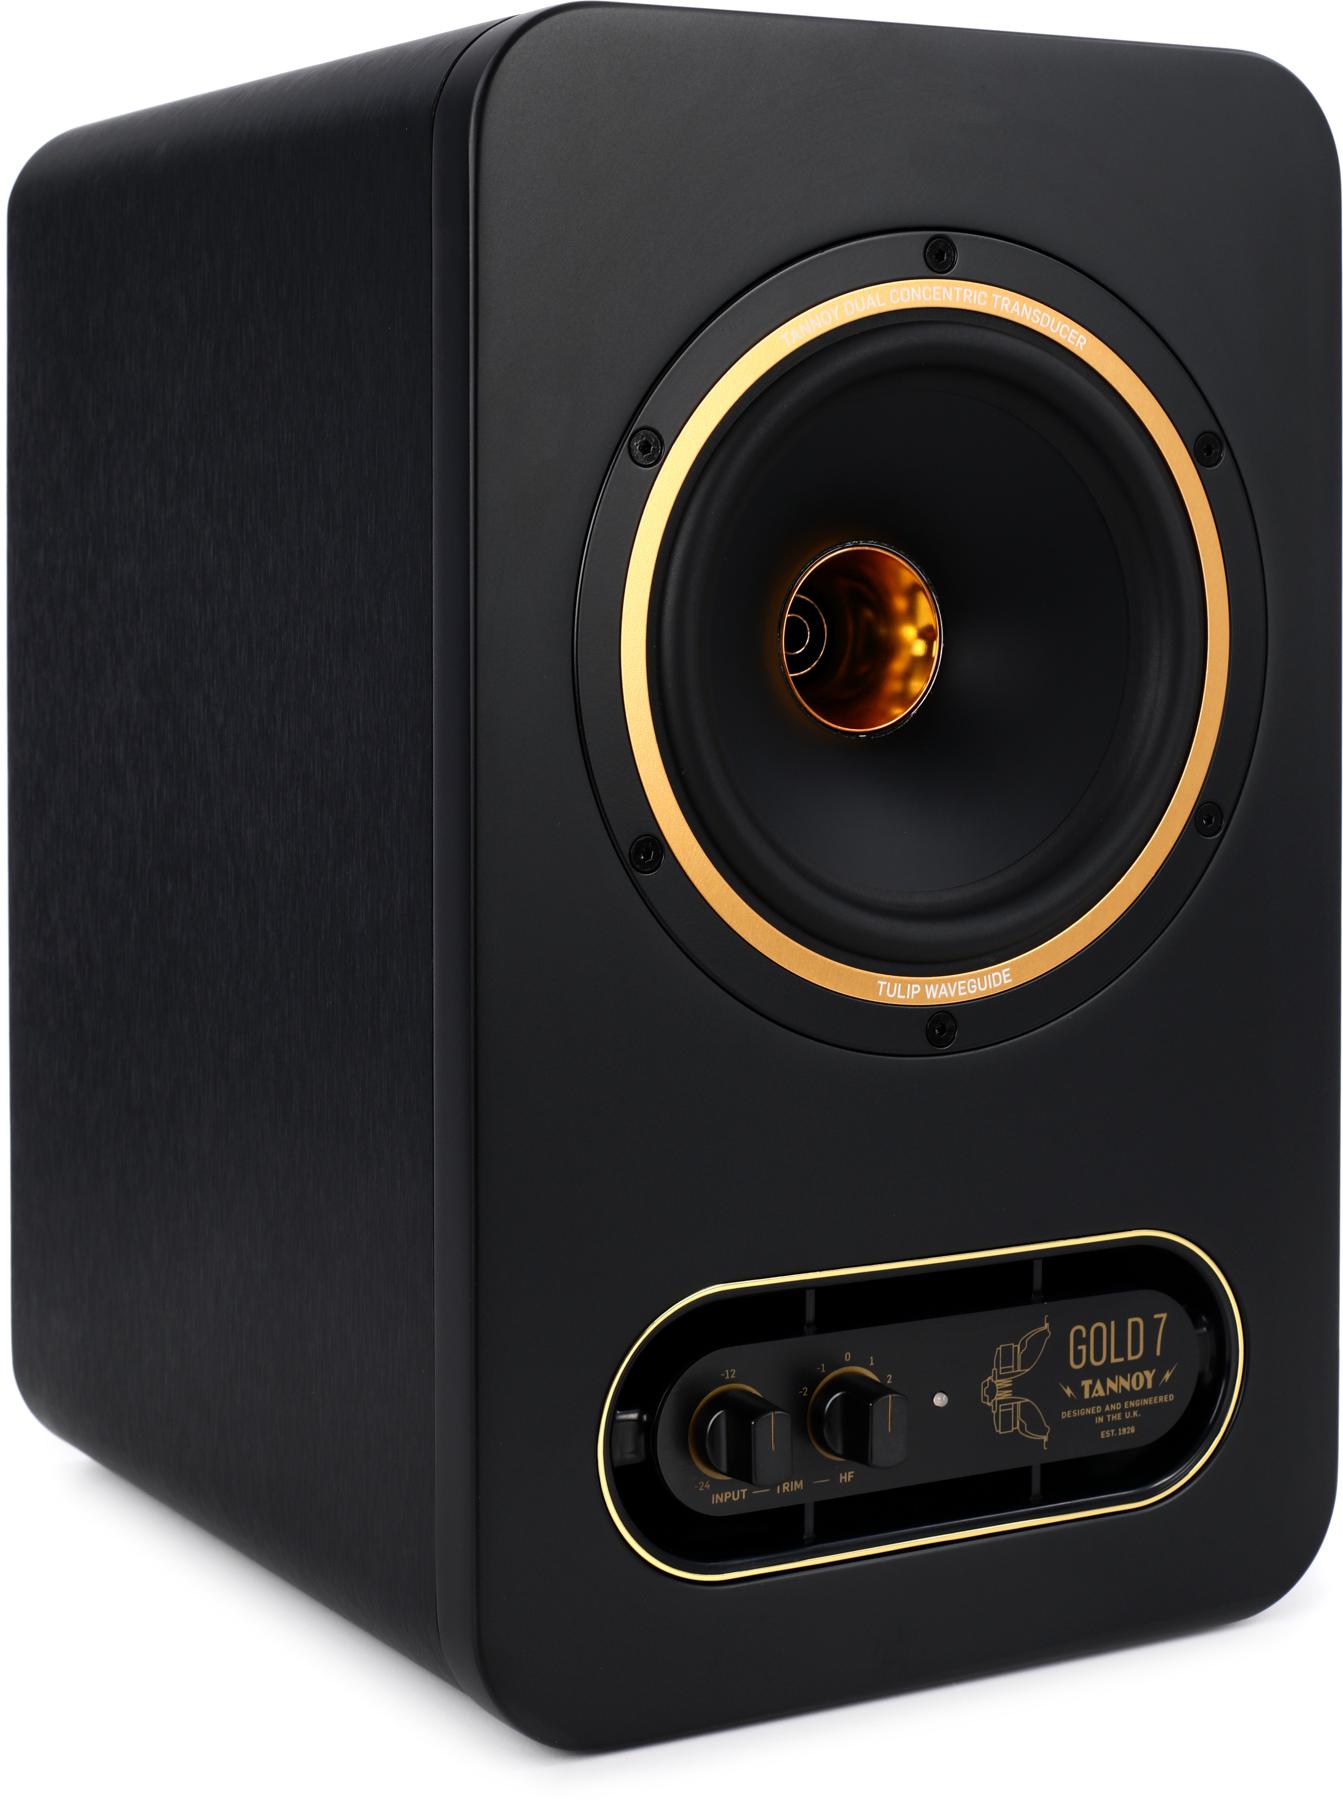 Tannoy GOLD 7 6.5-inch Powered Studio Monitor-image